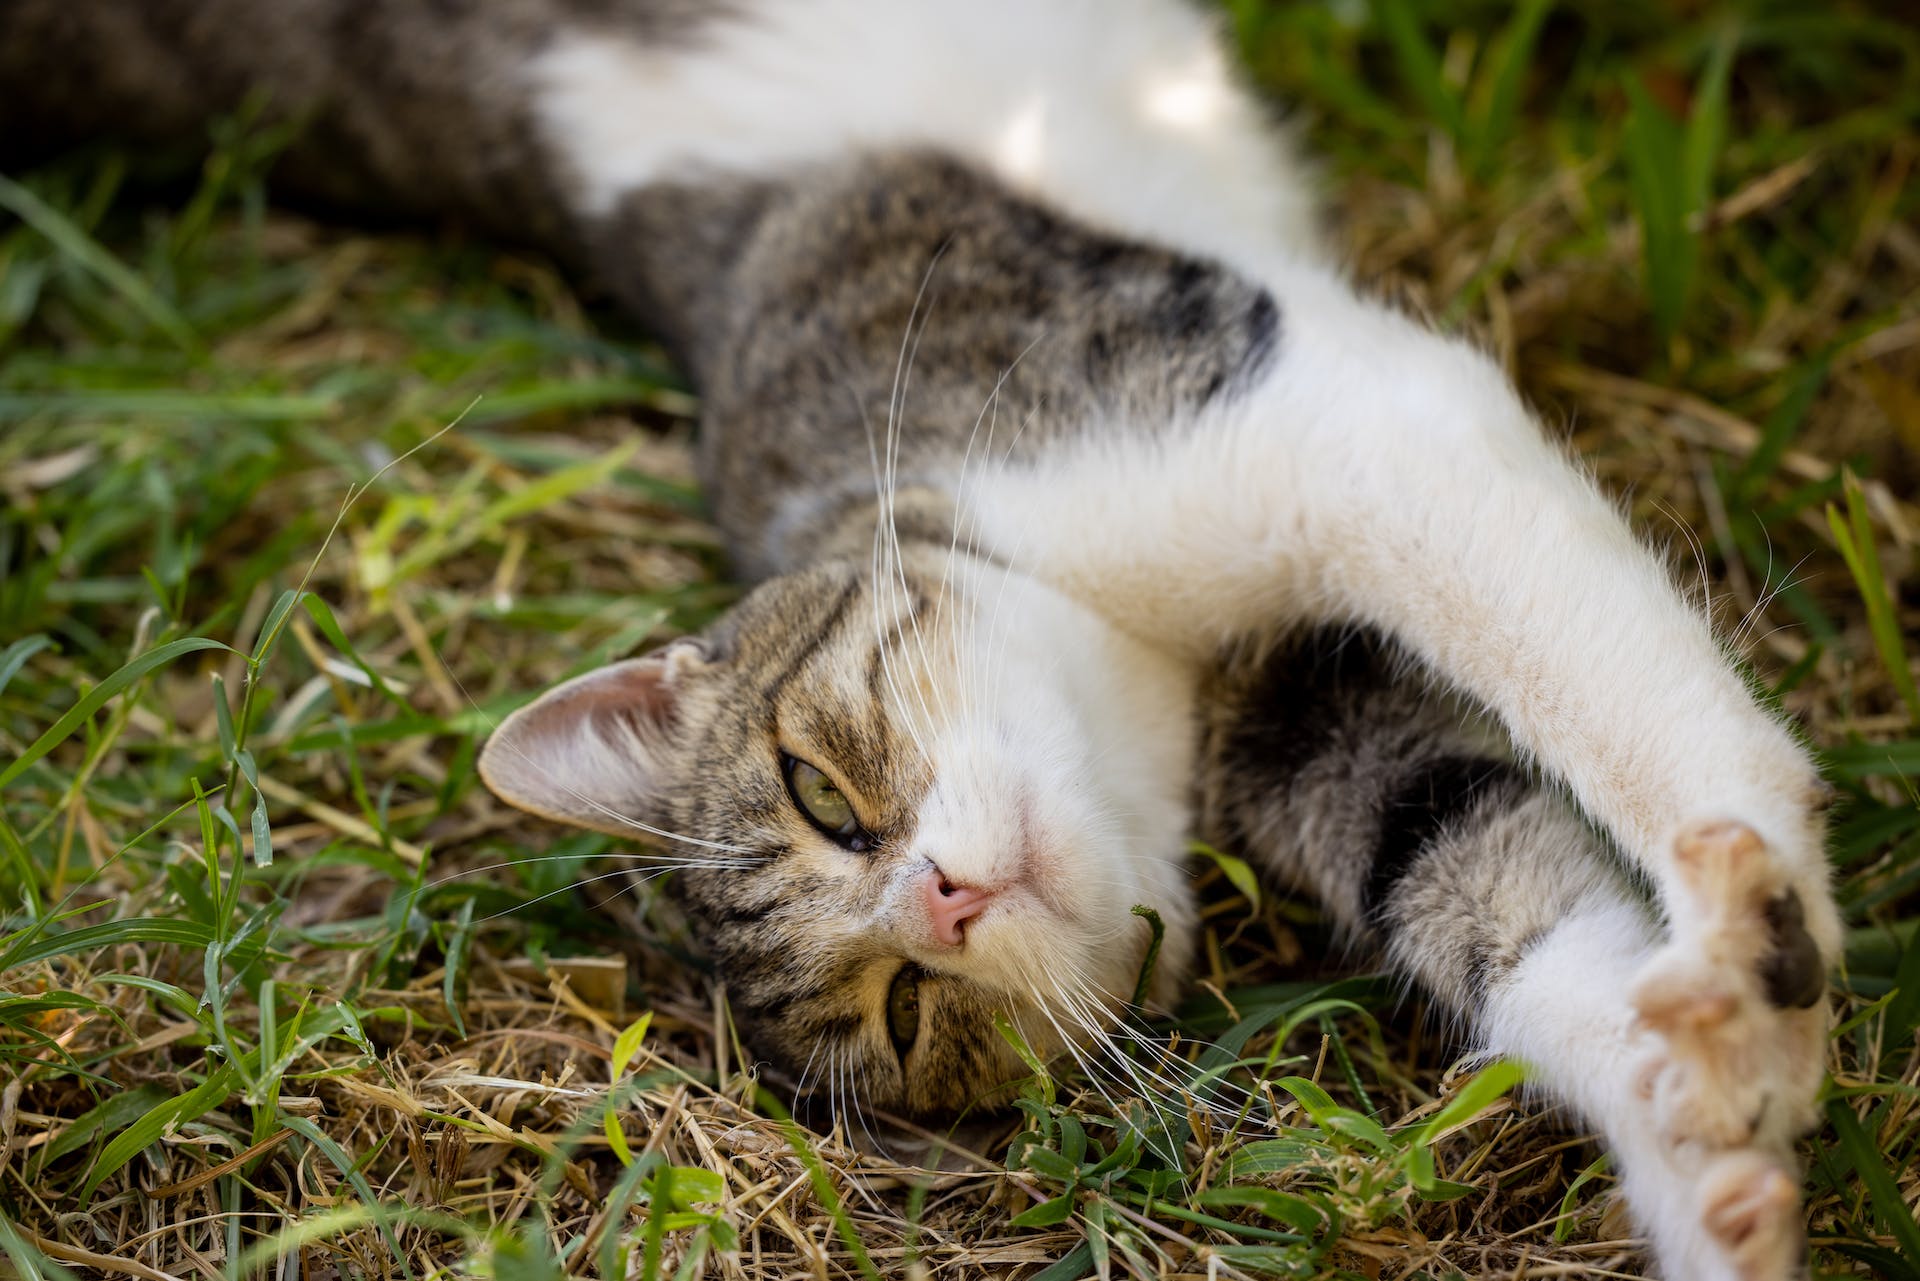 A cat stretching in the grass